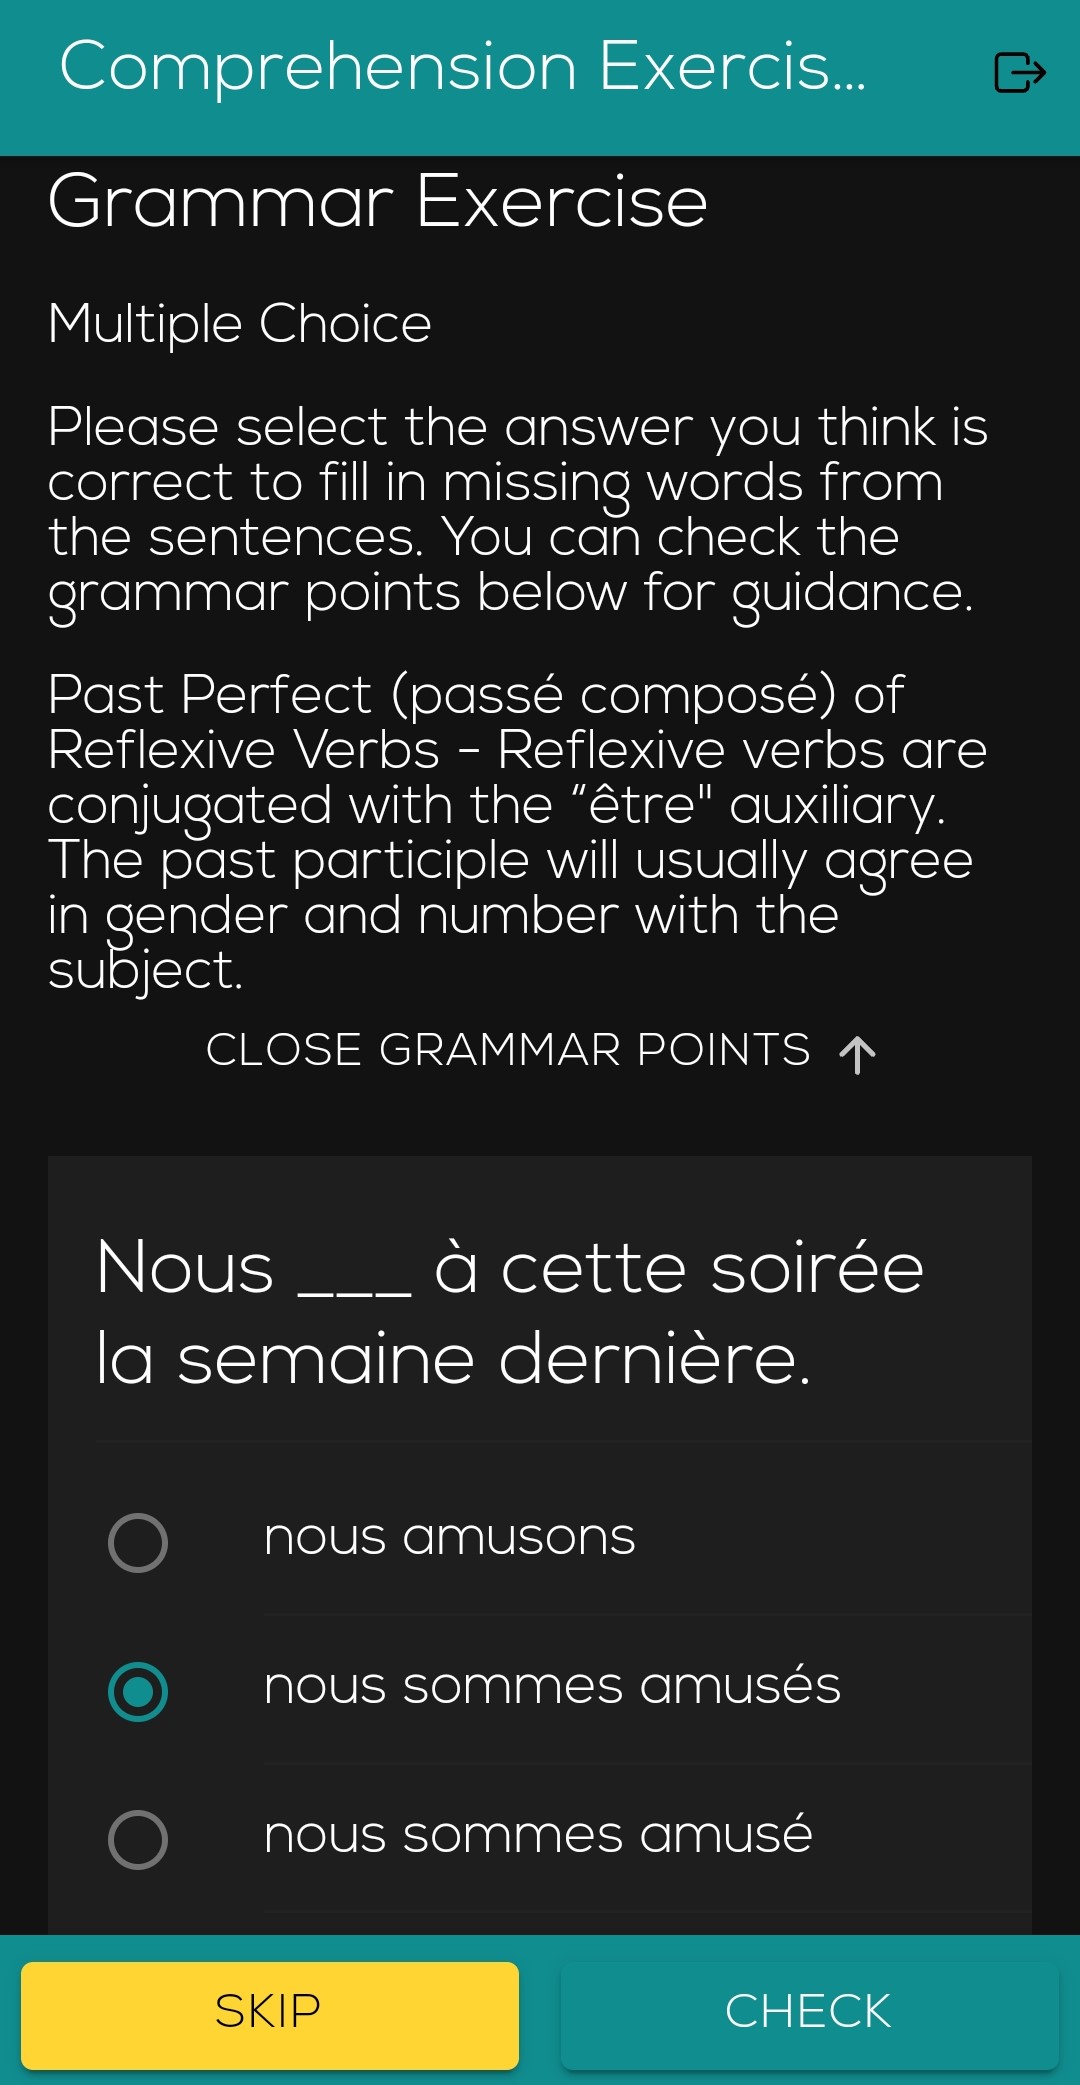 grammar practice to study French